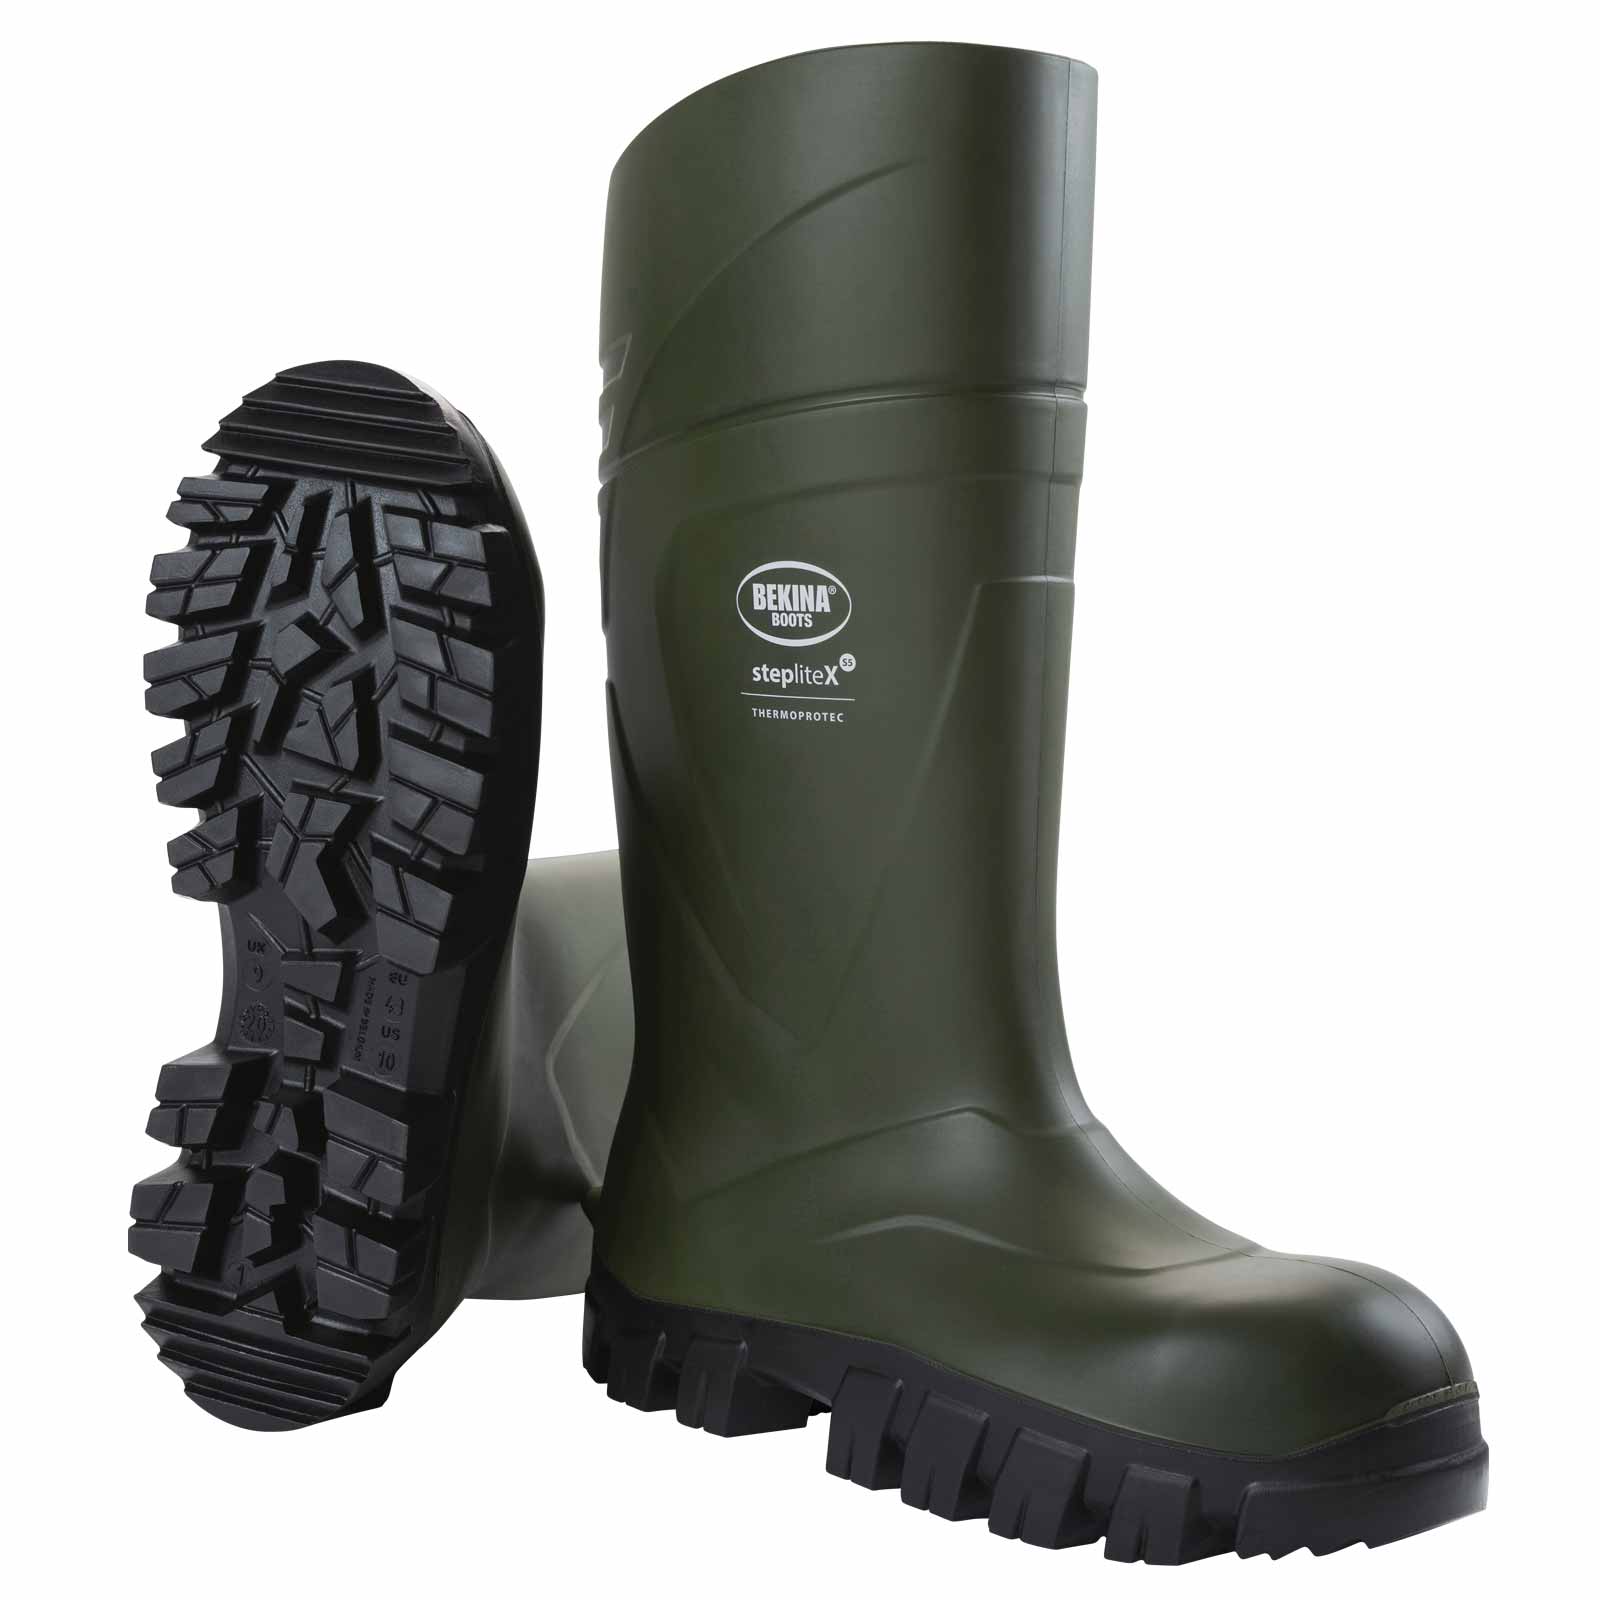 Bekina StepliteX ThermoProtect XCi s5 winter safety boots